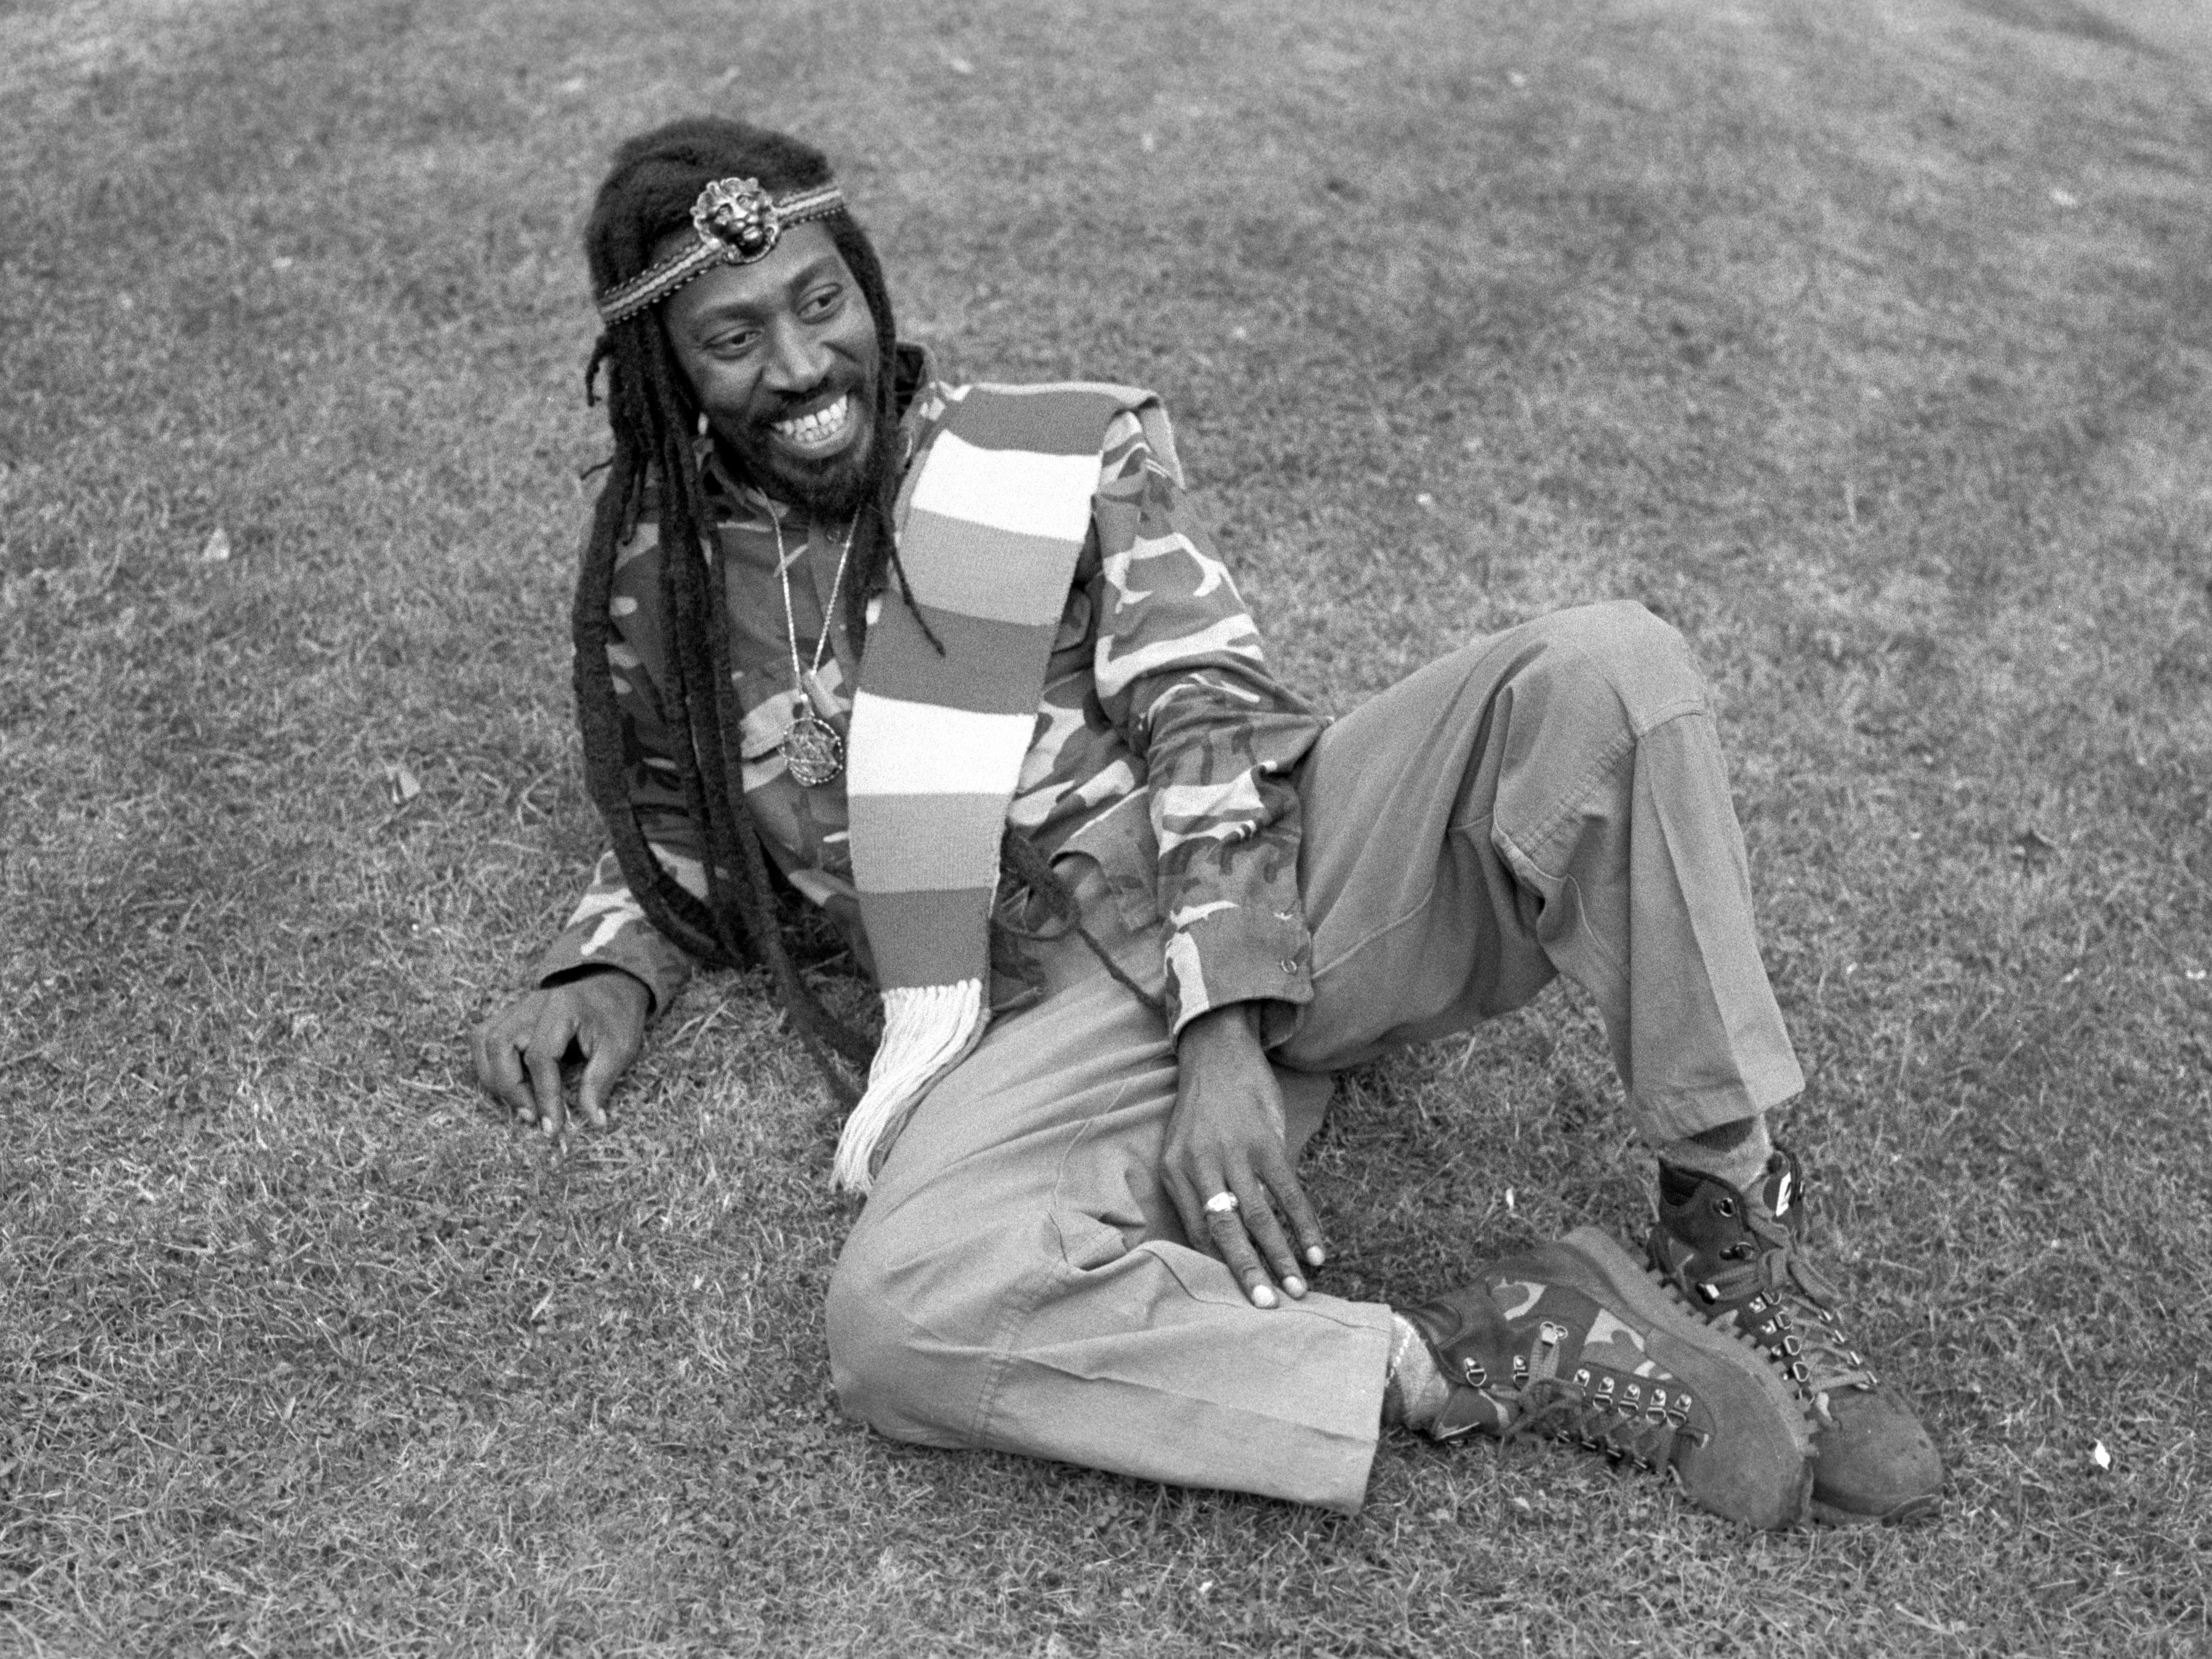 Bunny Wailer photographed in London in 1988. CREDIT: David Corio/Redferns/Getty Images